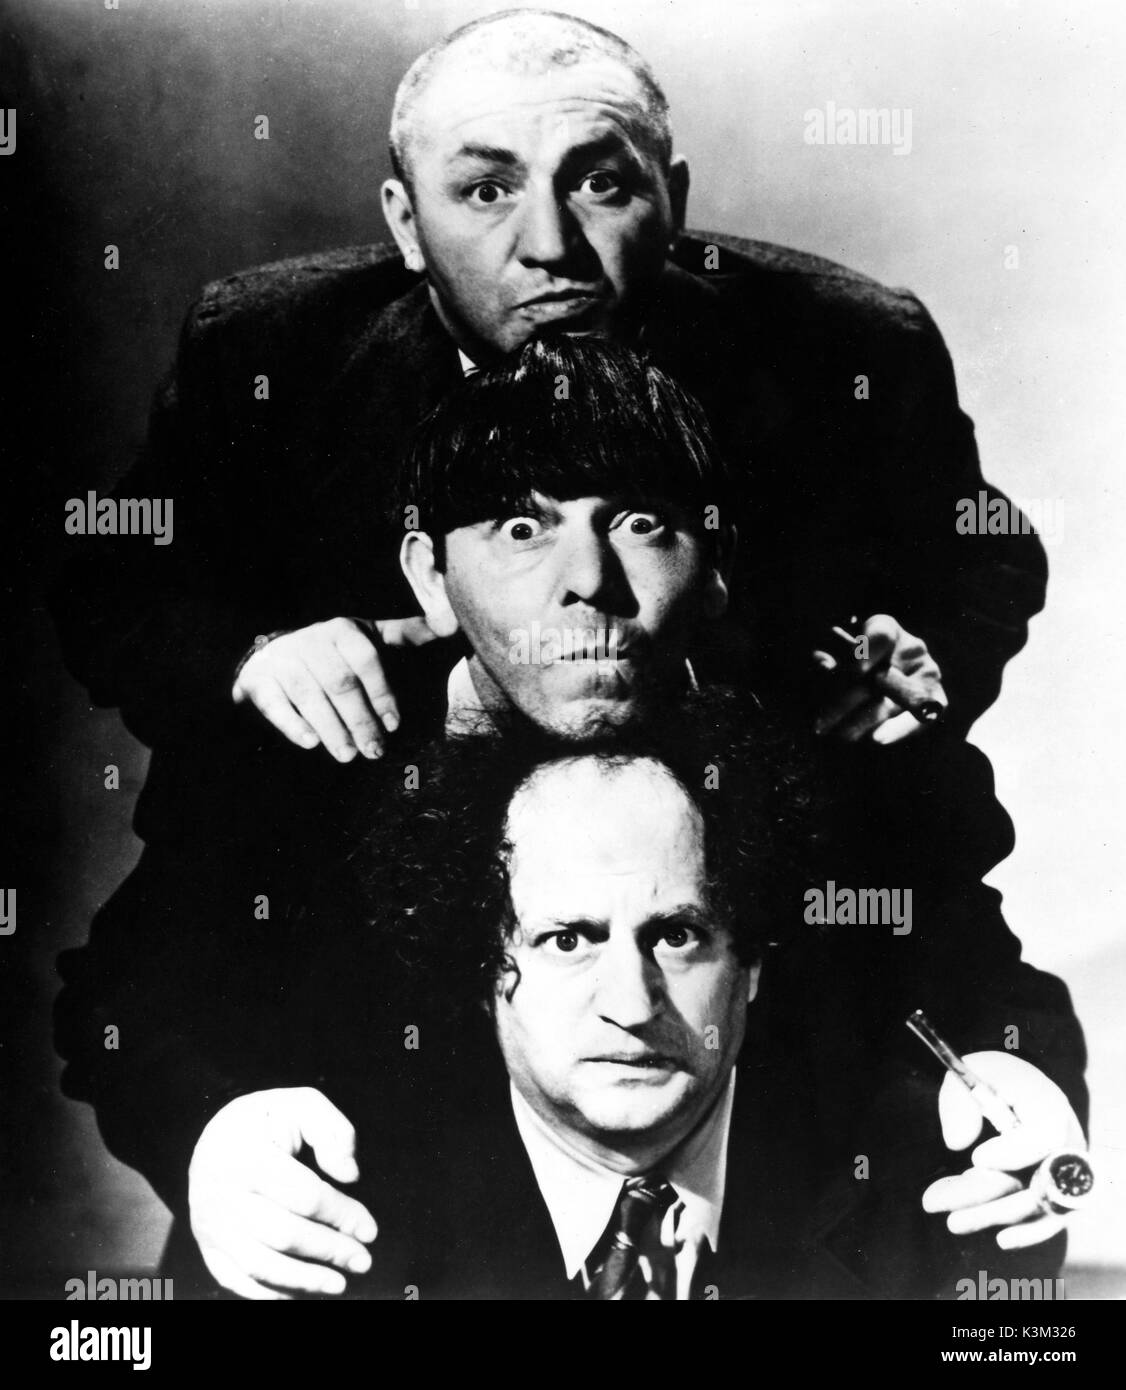 THE THREE STOOGES CURLY HOWARD, MOE HOWARD, LARRY FINE American vaudeville and screen comedy act in the early to mid C20th THE THREE STOOGES Stock Photo